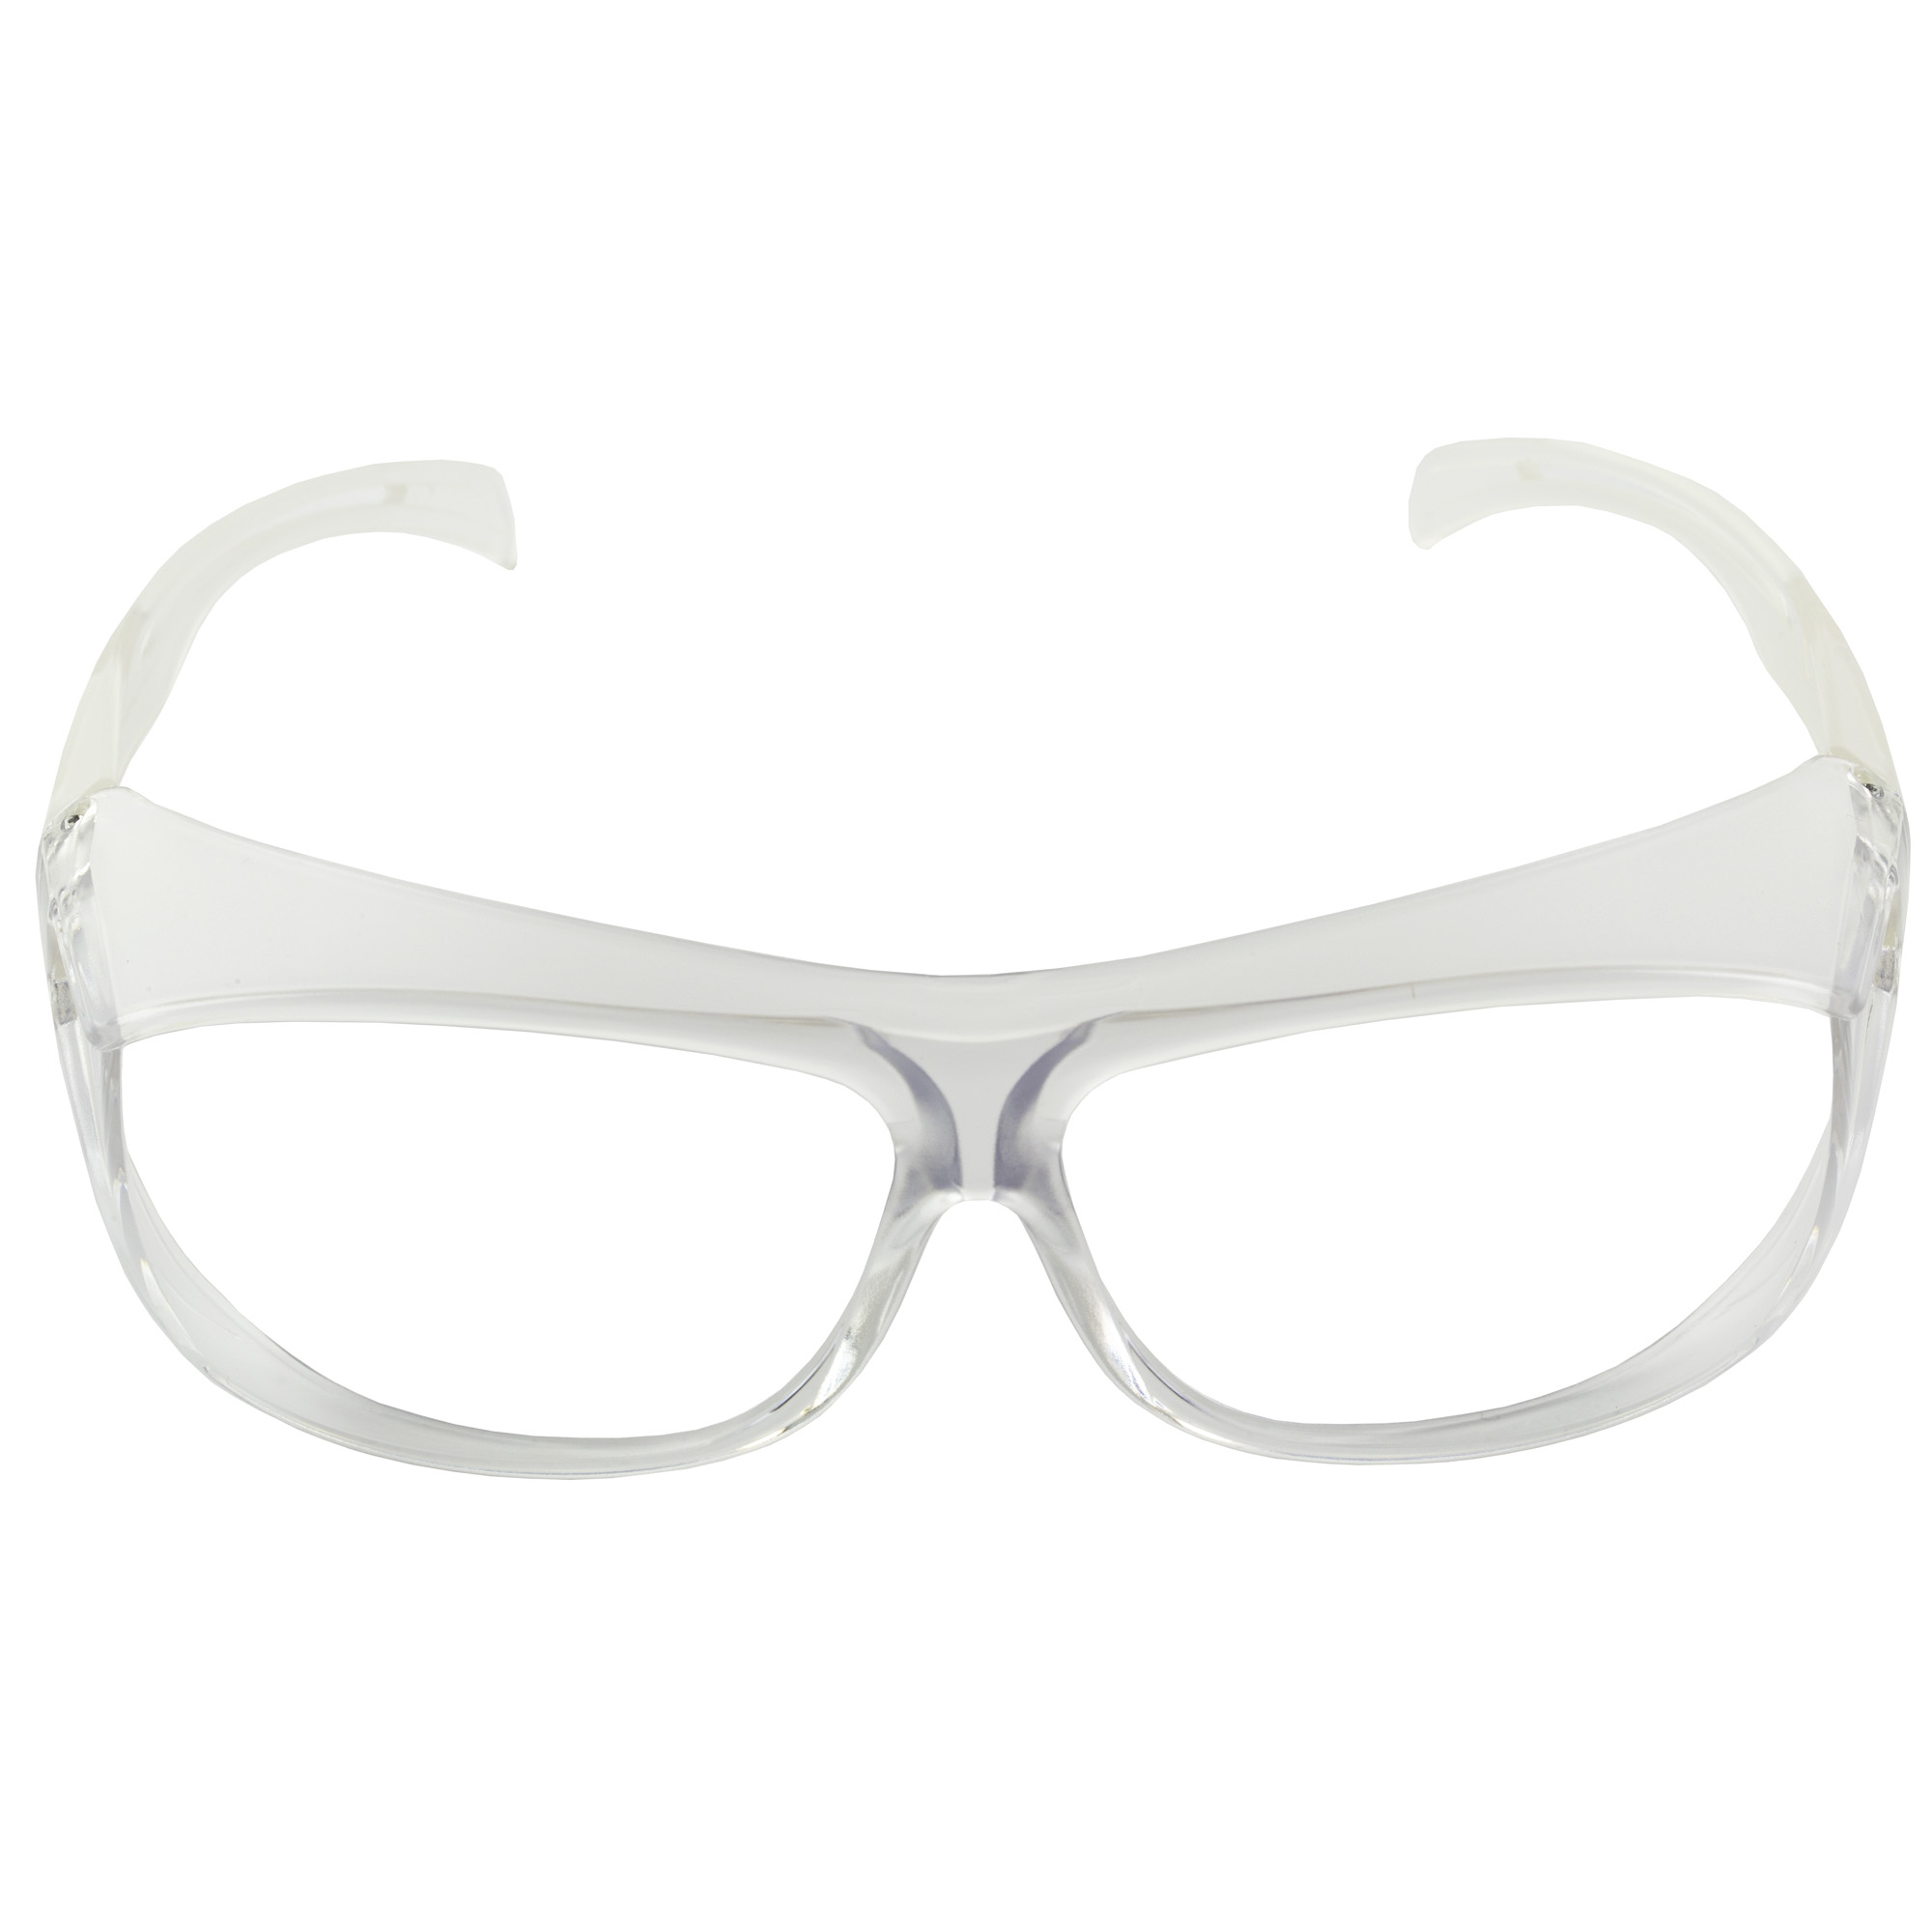 Allen Fitover Shooting Glasses Clear